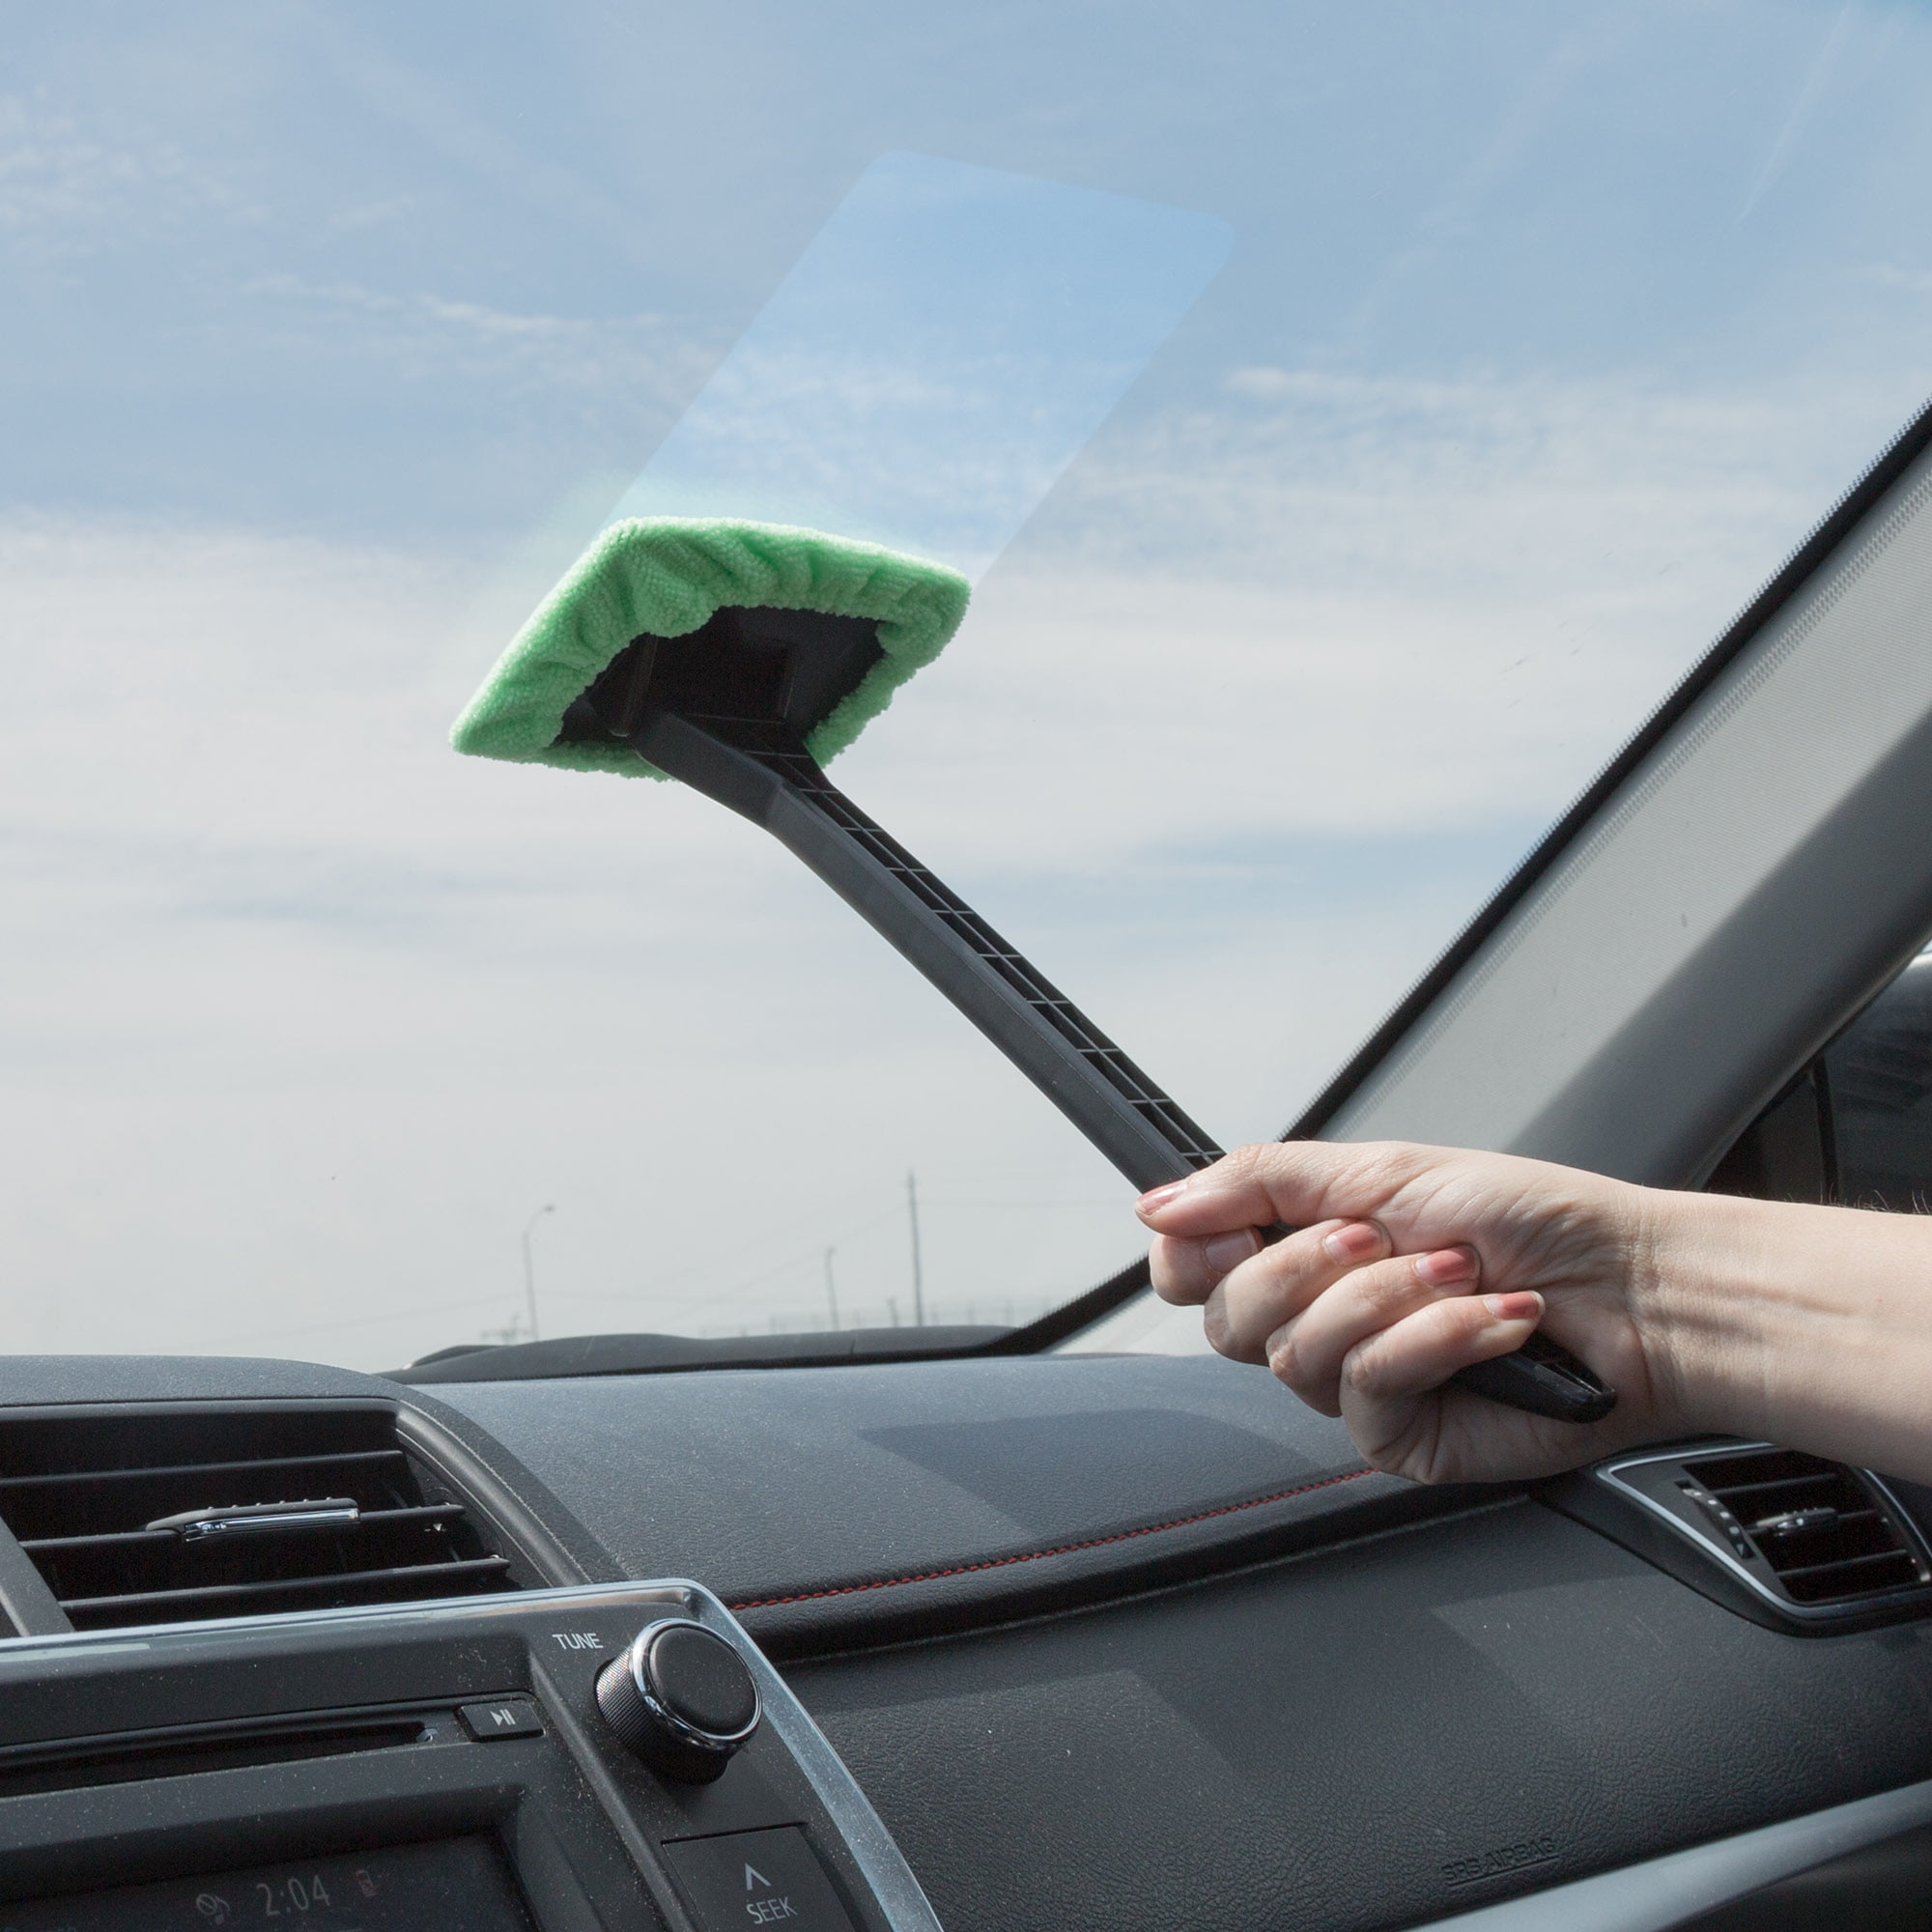 Windshield Easy Cleaner - Clean Hard-To-Reach for Windows On Your